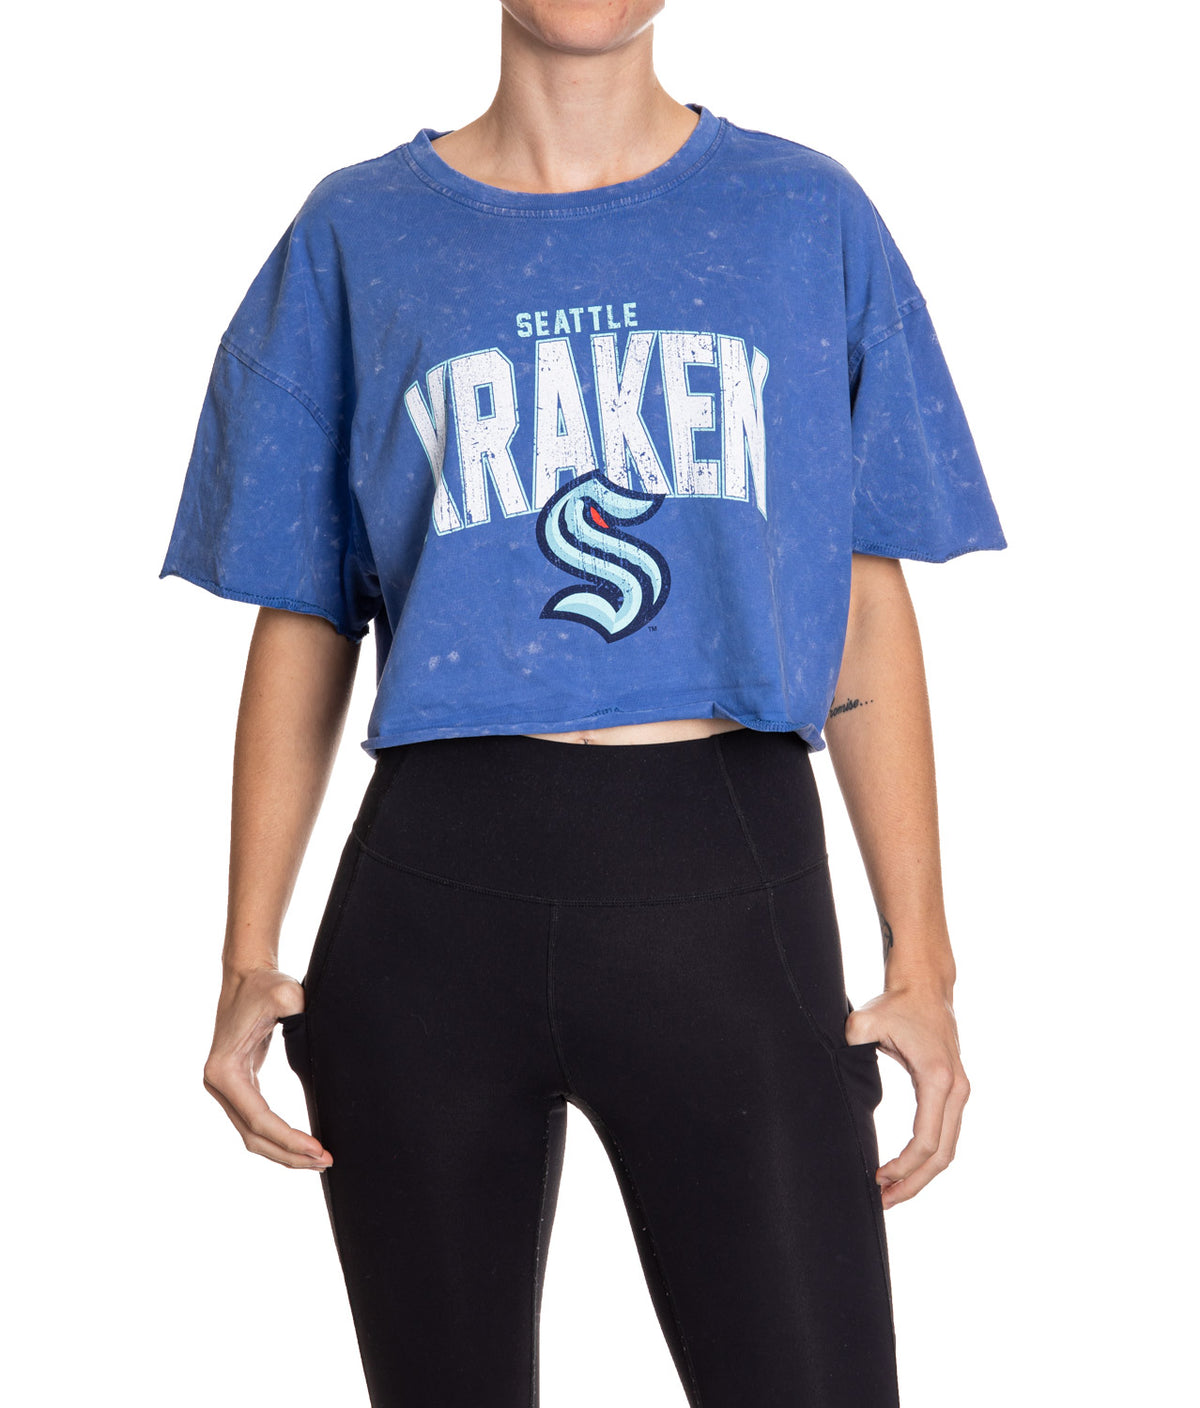 Woman standing in front of a white background wearing an oversized, blue, acid wash crop top - featuring a Seattle Kraken logo in the center of the shirt.